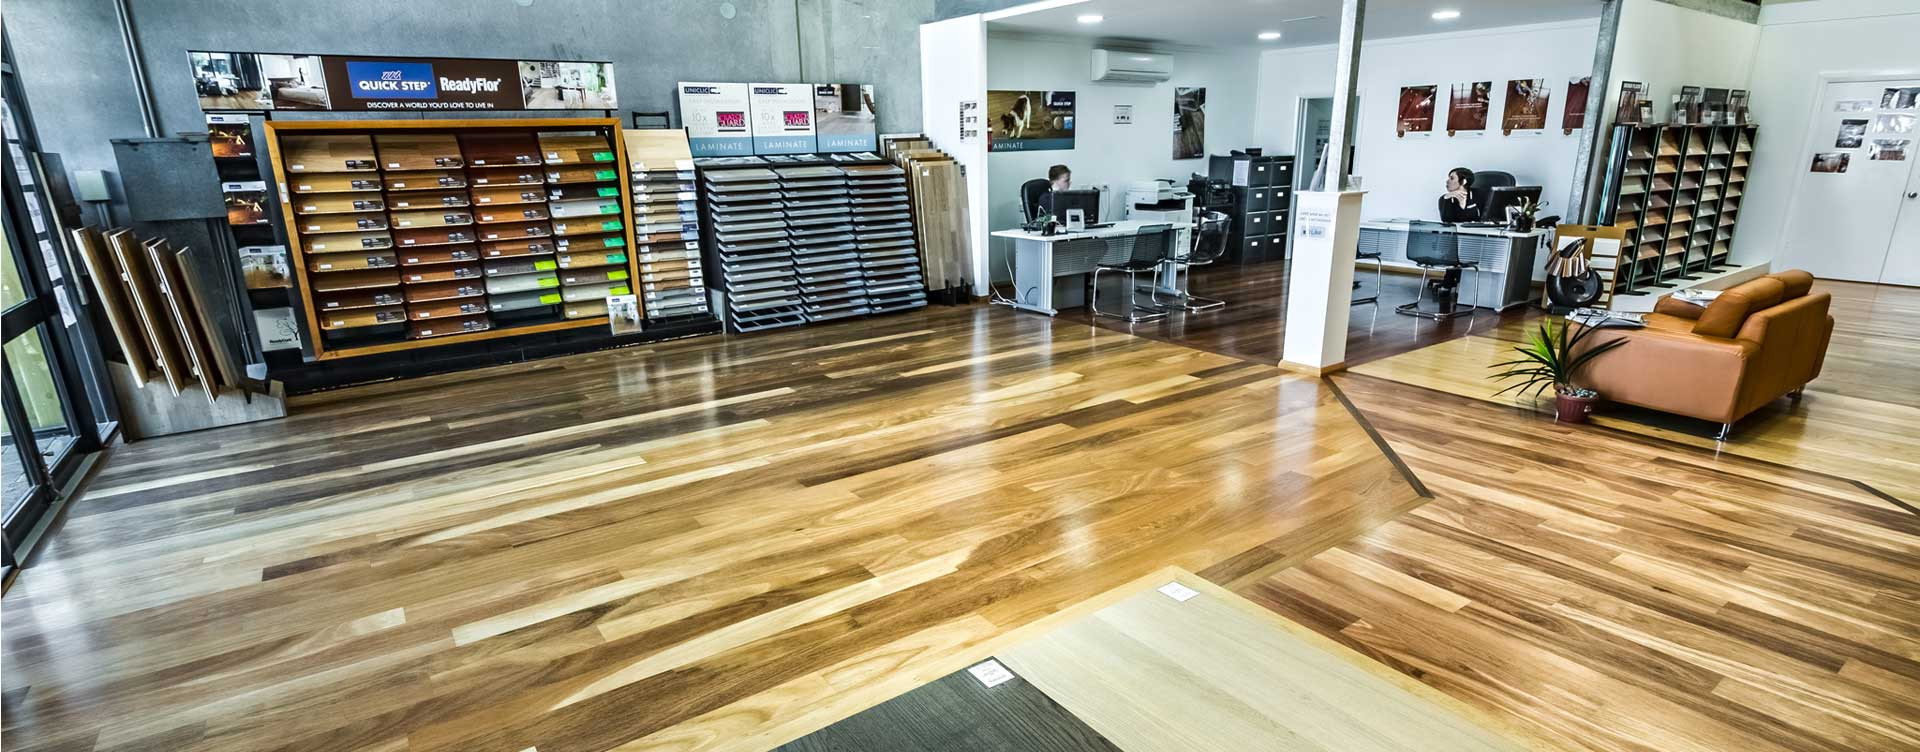 29 Lovely How to Install Floating Hardwood Floors 2024 free download how to install floating hardwood floors of timber flooring perth coastal flooring wa quality wooden throughout thats why they call us the home of fine wood floors